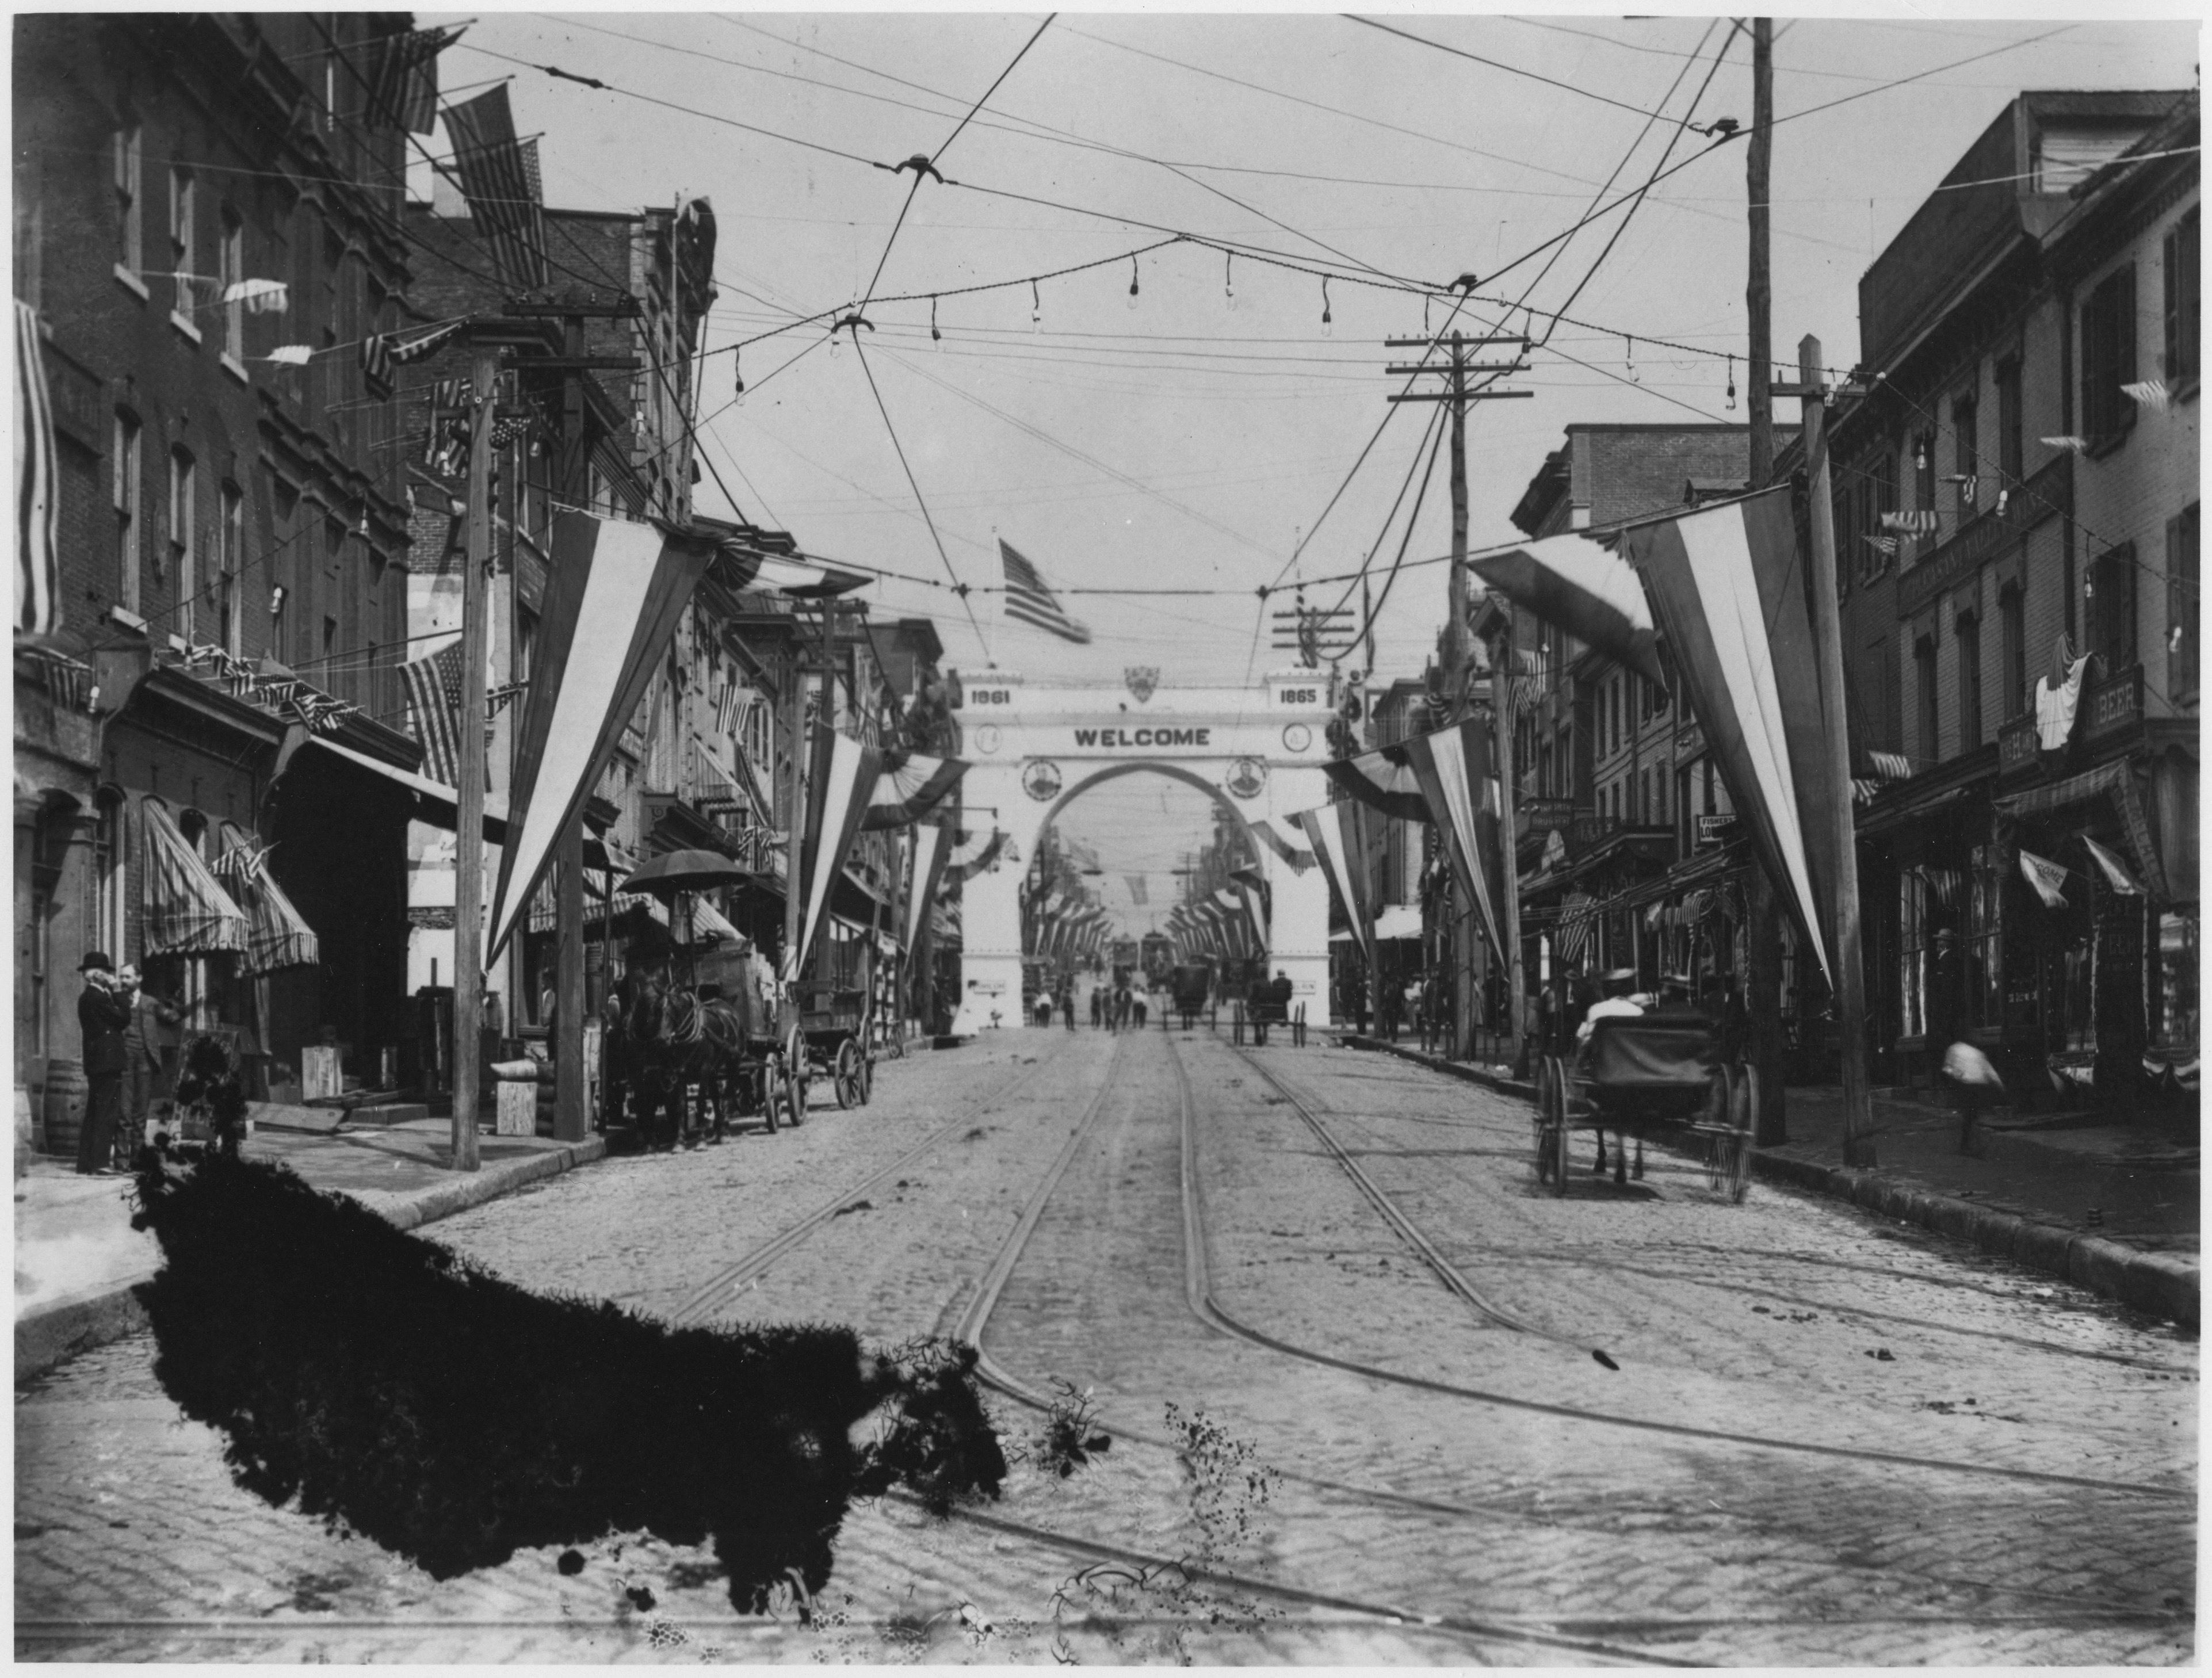 City street and an arch reading "Welcome" decorated in patriotic bunting and American flags